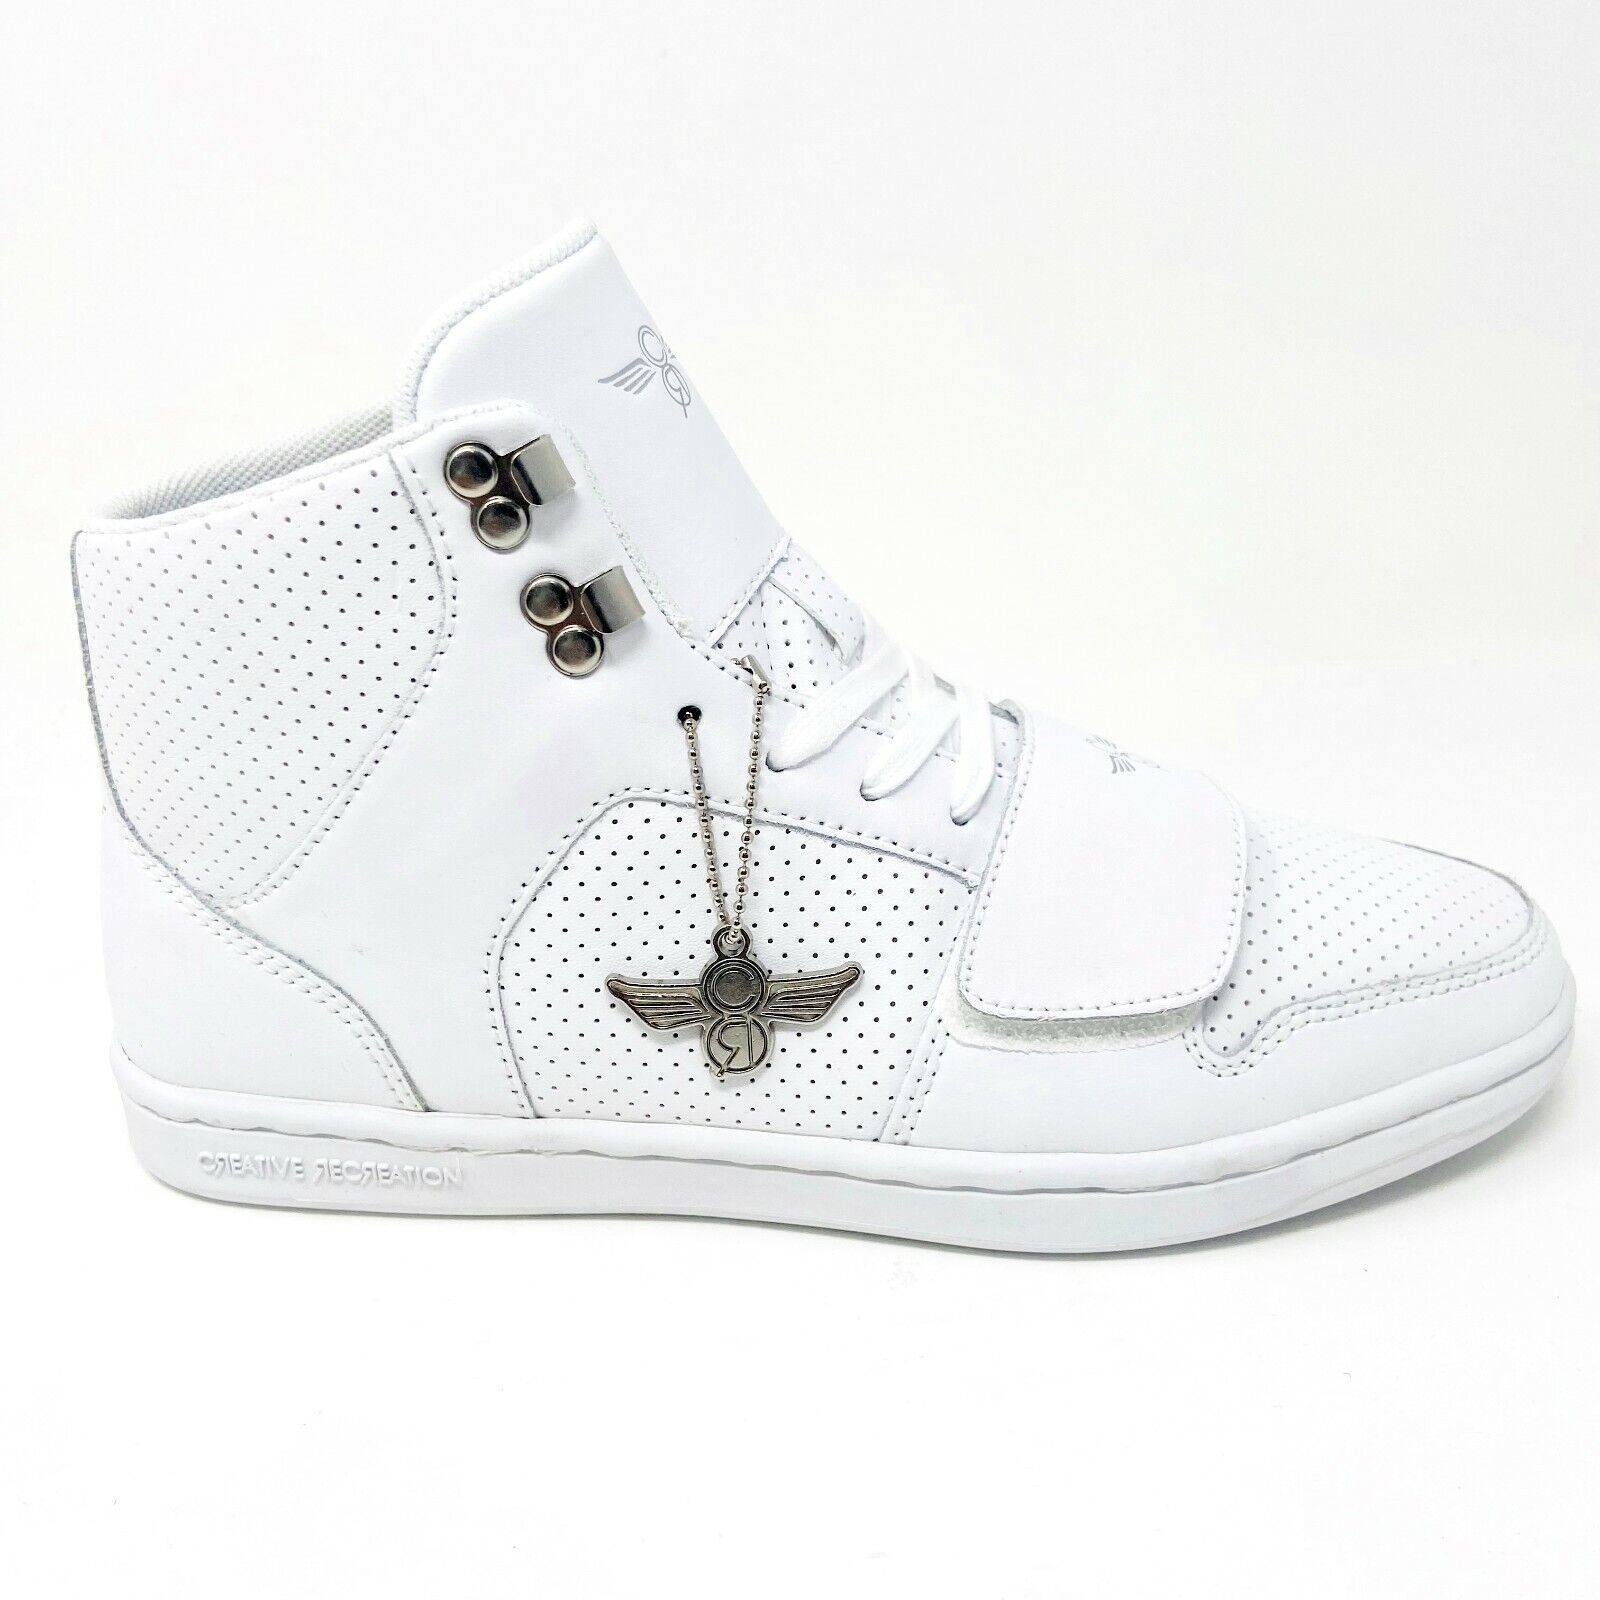 Creative Recreation Cesario White Youth  Kids High Top Sneakers